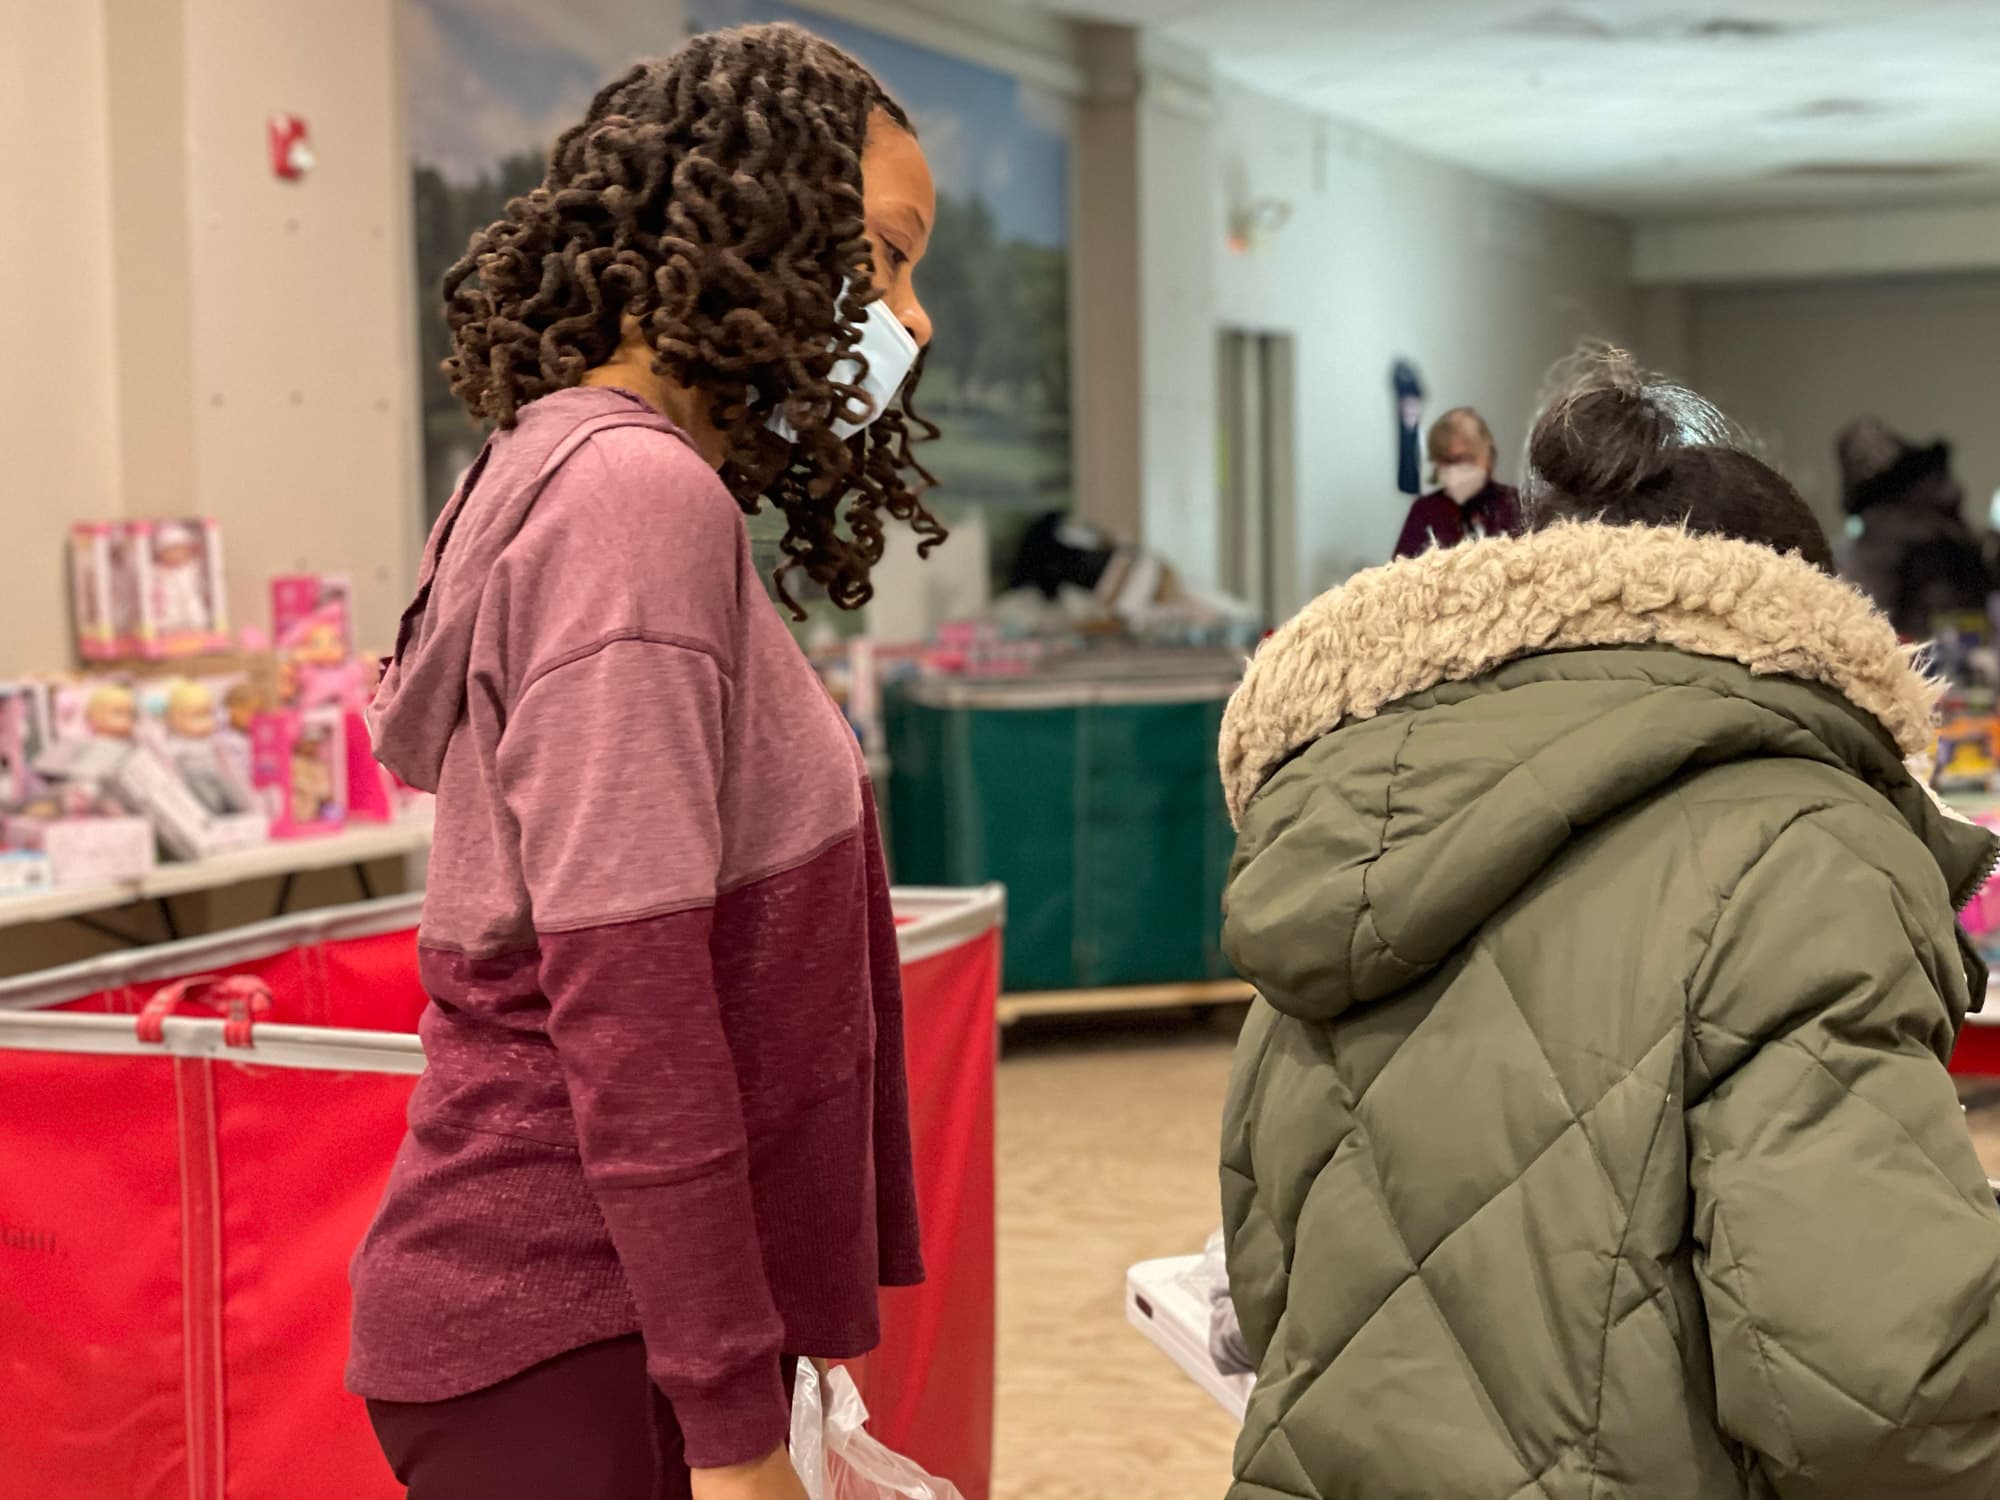 At 38 Bromfield Street, volunteers led parents through an improvised storefront looking for holiday gifts for their children. (Max Larkin/WBUR)